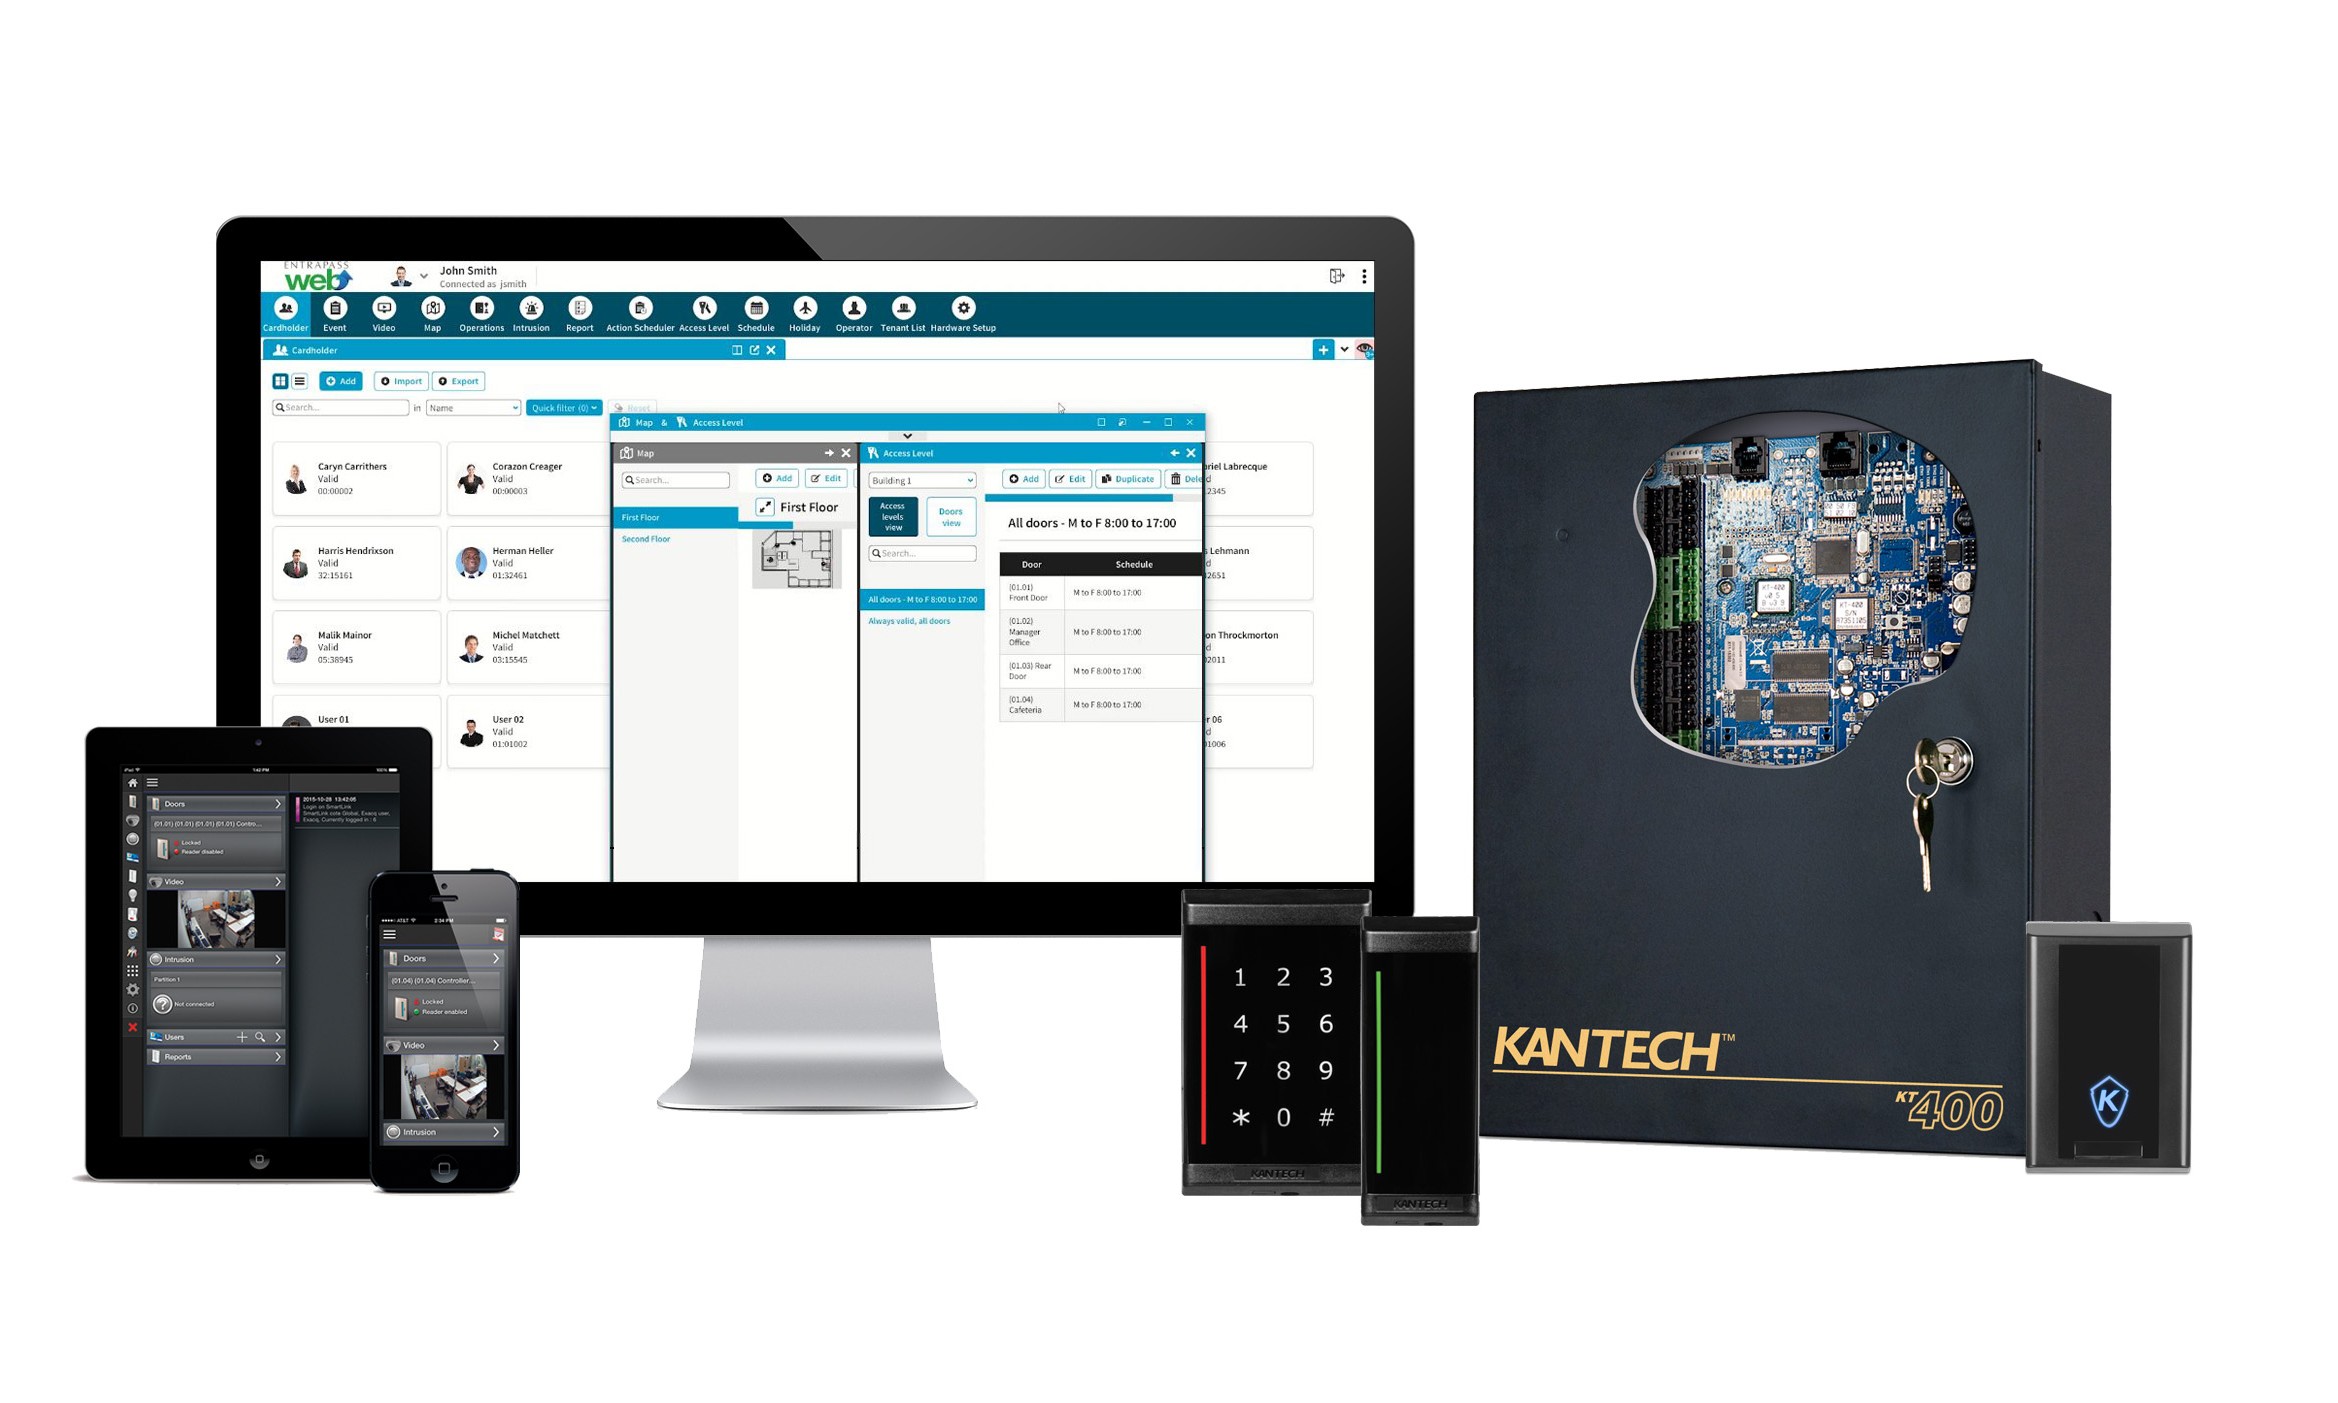 Tyco Kantech strengthens intrusion support, mobile and cybersecurity applications in latest version of EntraPass software